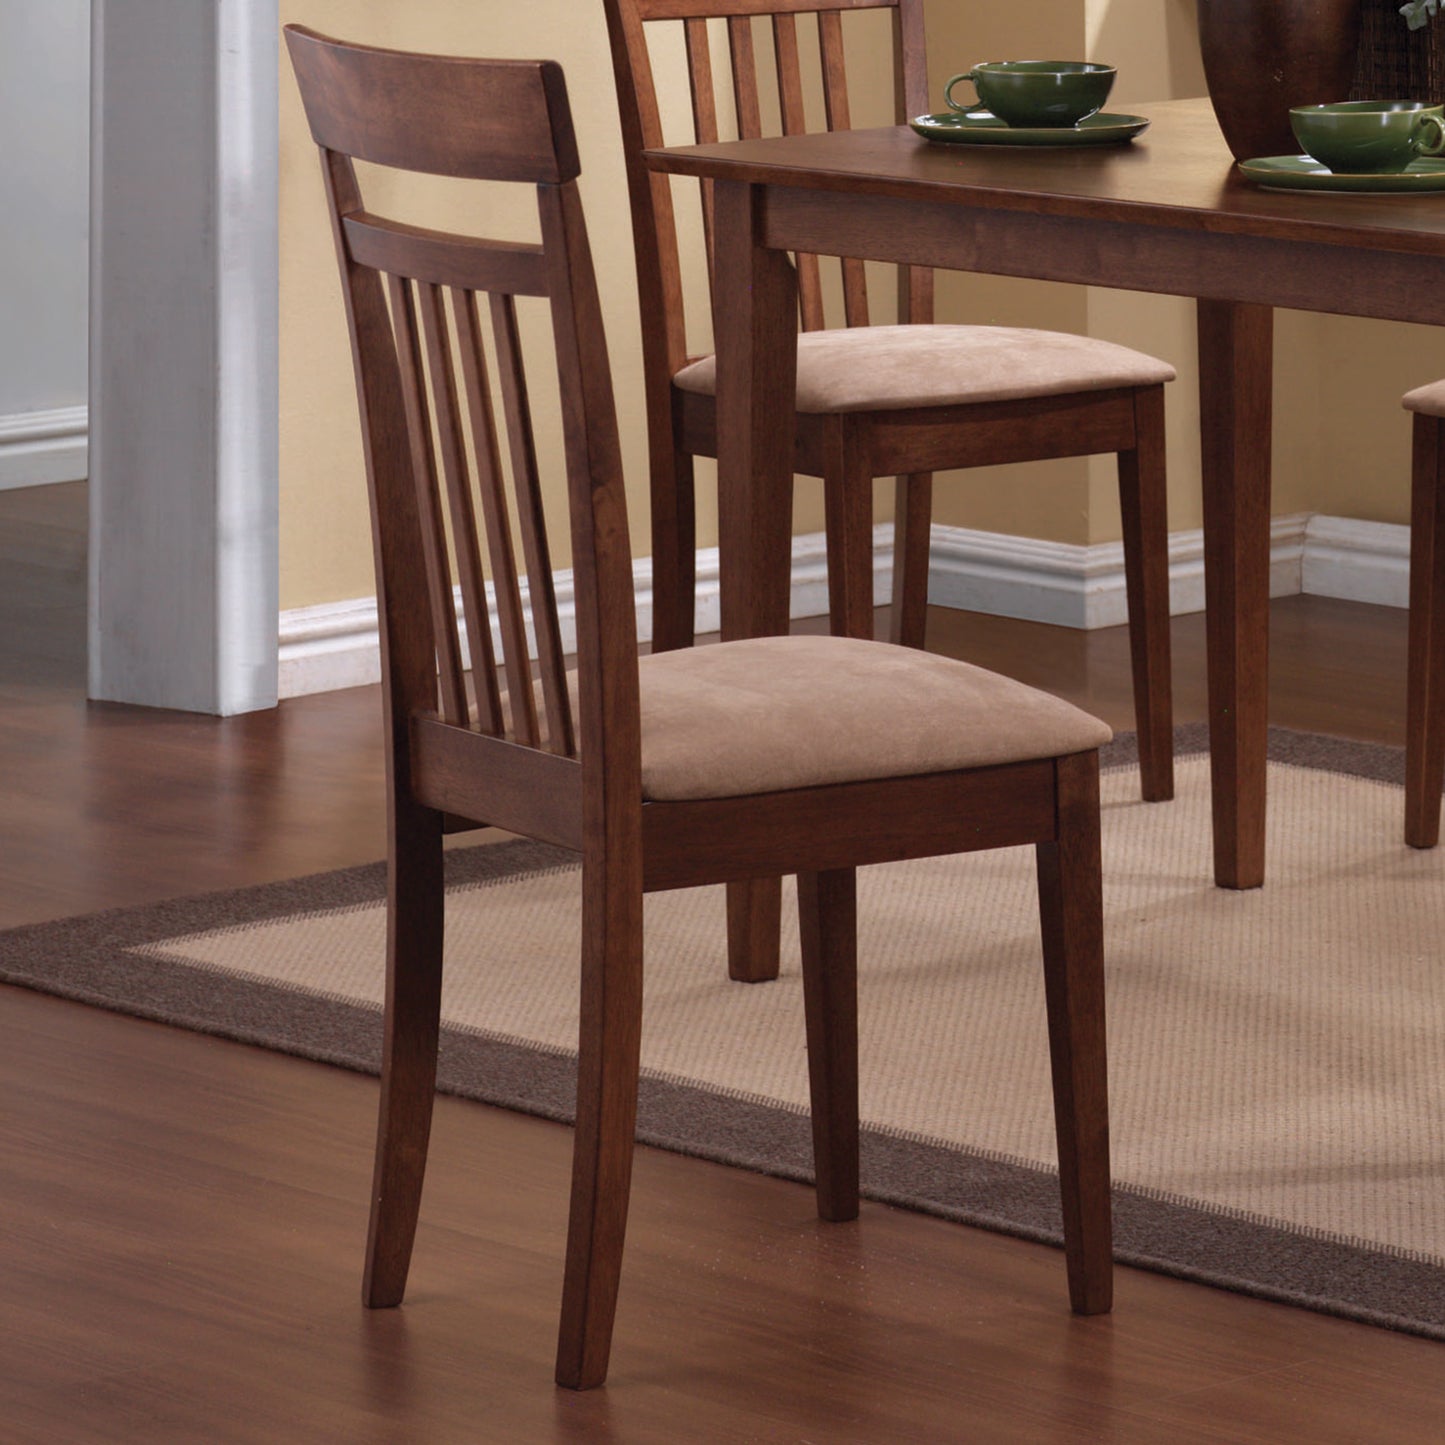 Chestnut 5PC Dining Set SOLD IN SET ONLY